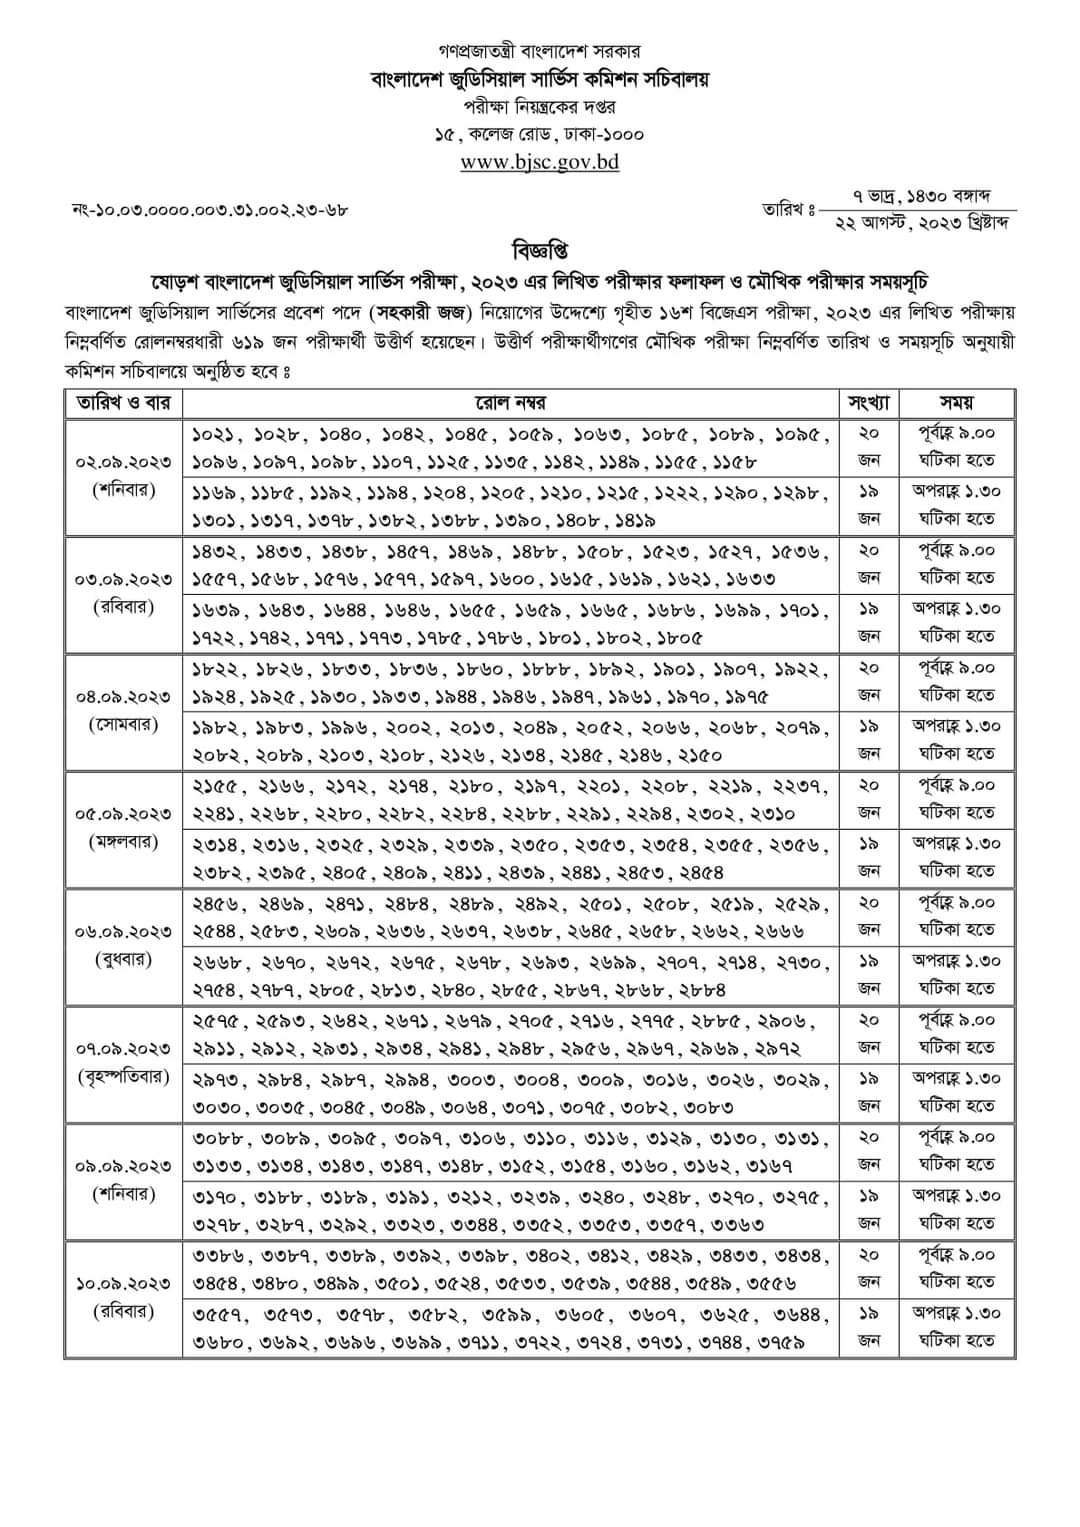 Result of 16th BJSC Exam-2023 and Viva Schedule